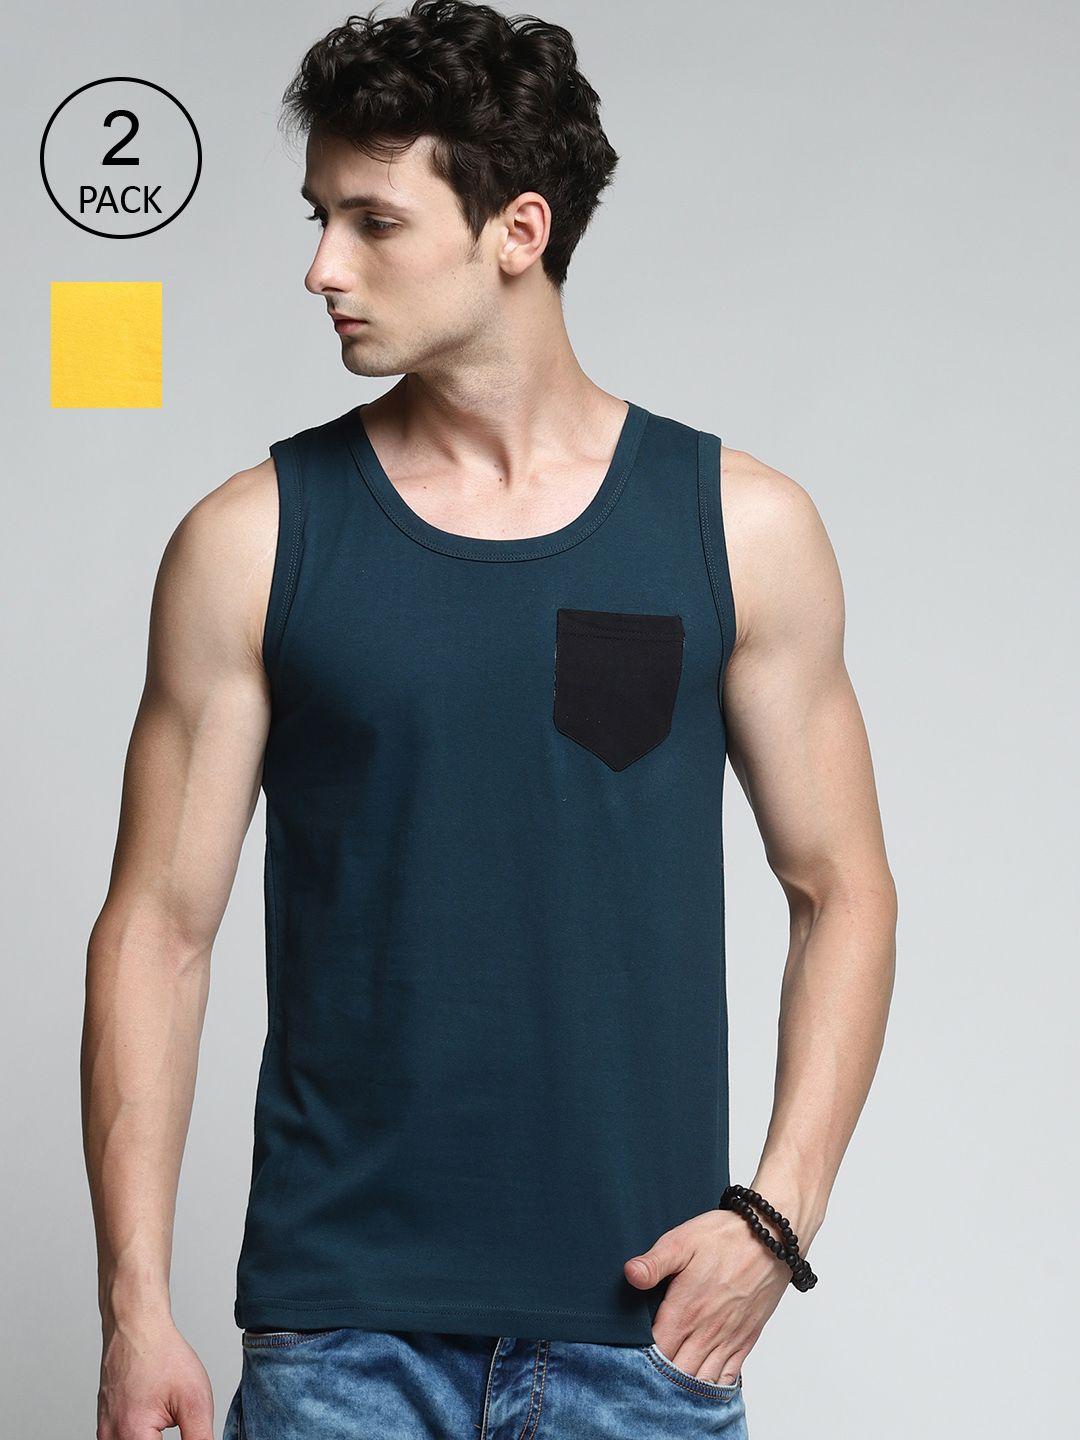 trends tower men pack of 2 solid cotton tank vests